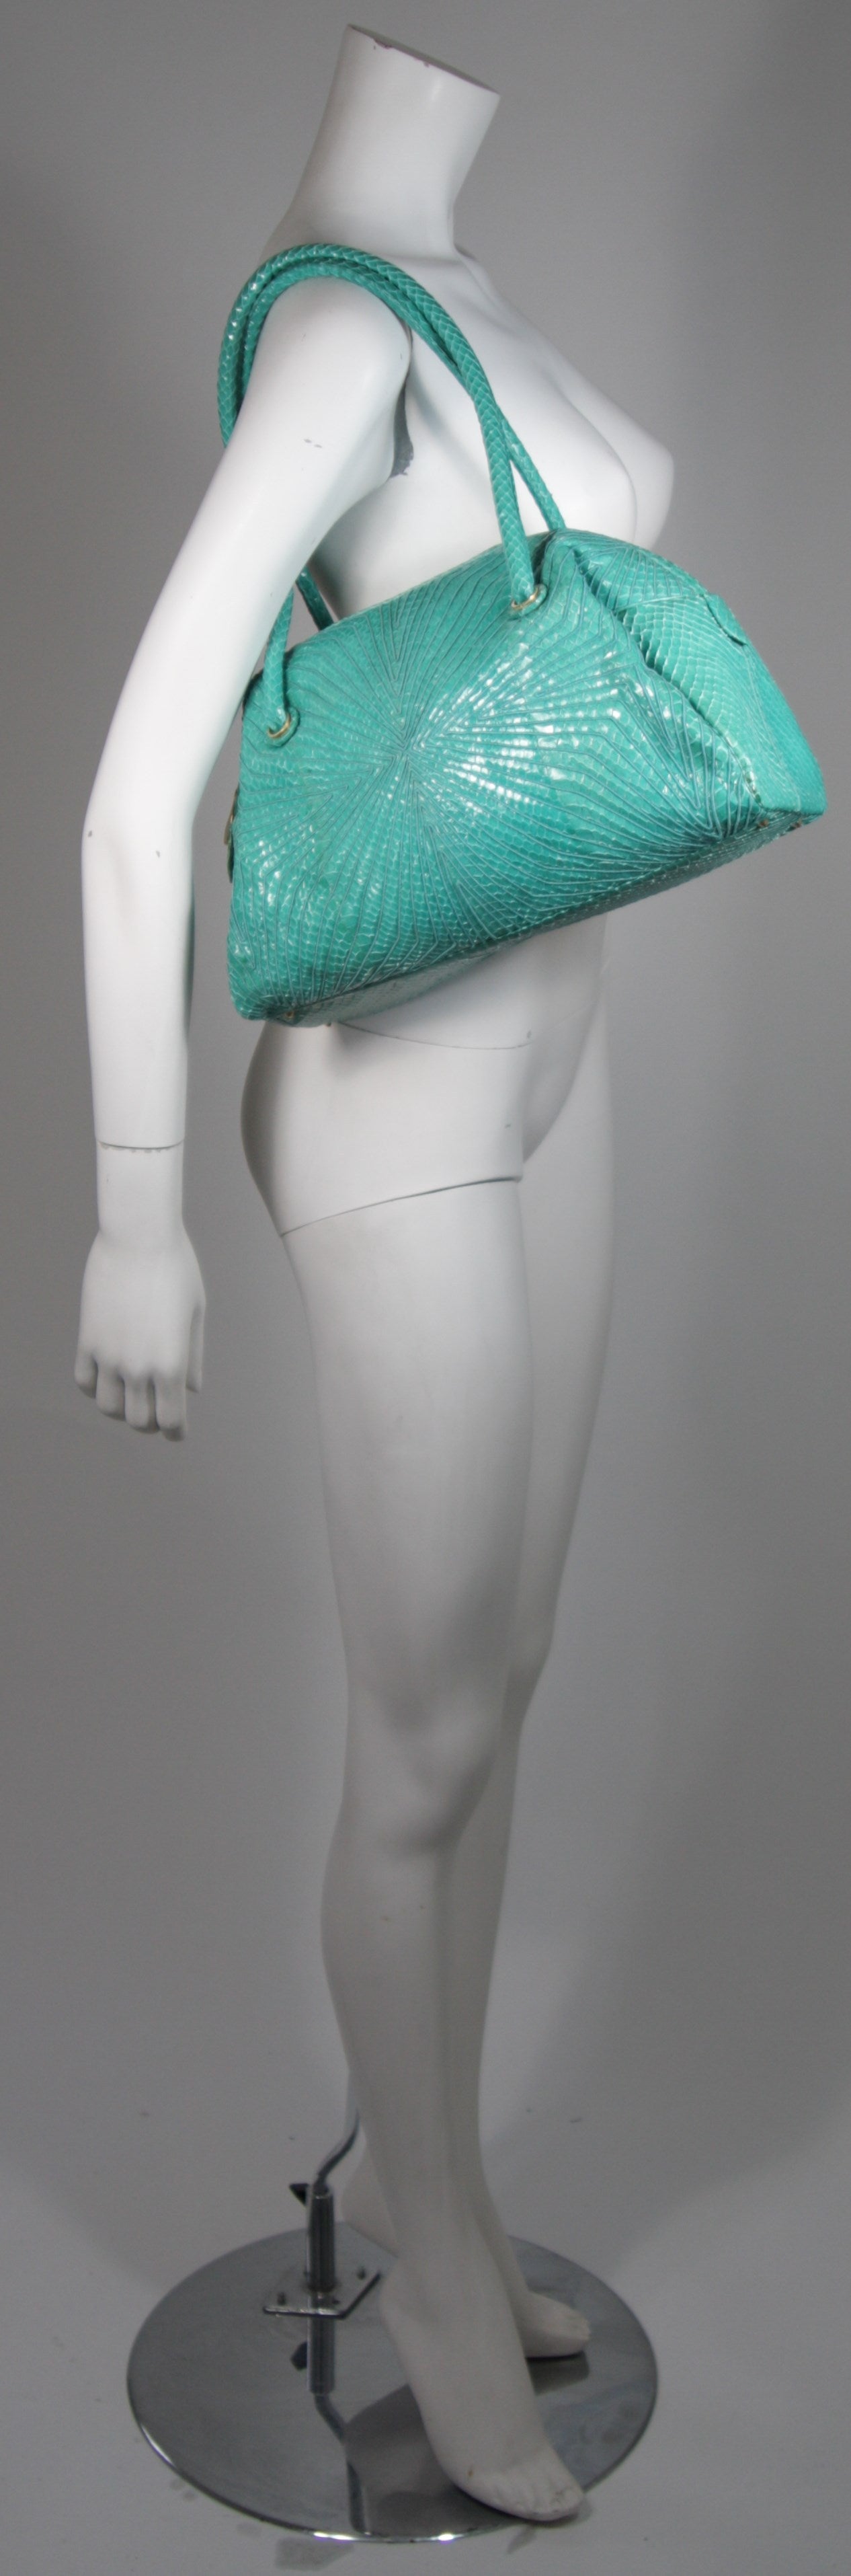 This vintage Judith Leiber is available for viewing at our Beverly Hills Boutique. We offer a large selection of evening gowns and luxury garments.

This handbag is composed of a turquoise snake skin. The handbag has a bowler shape with double